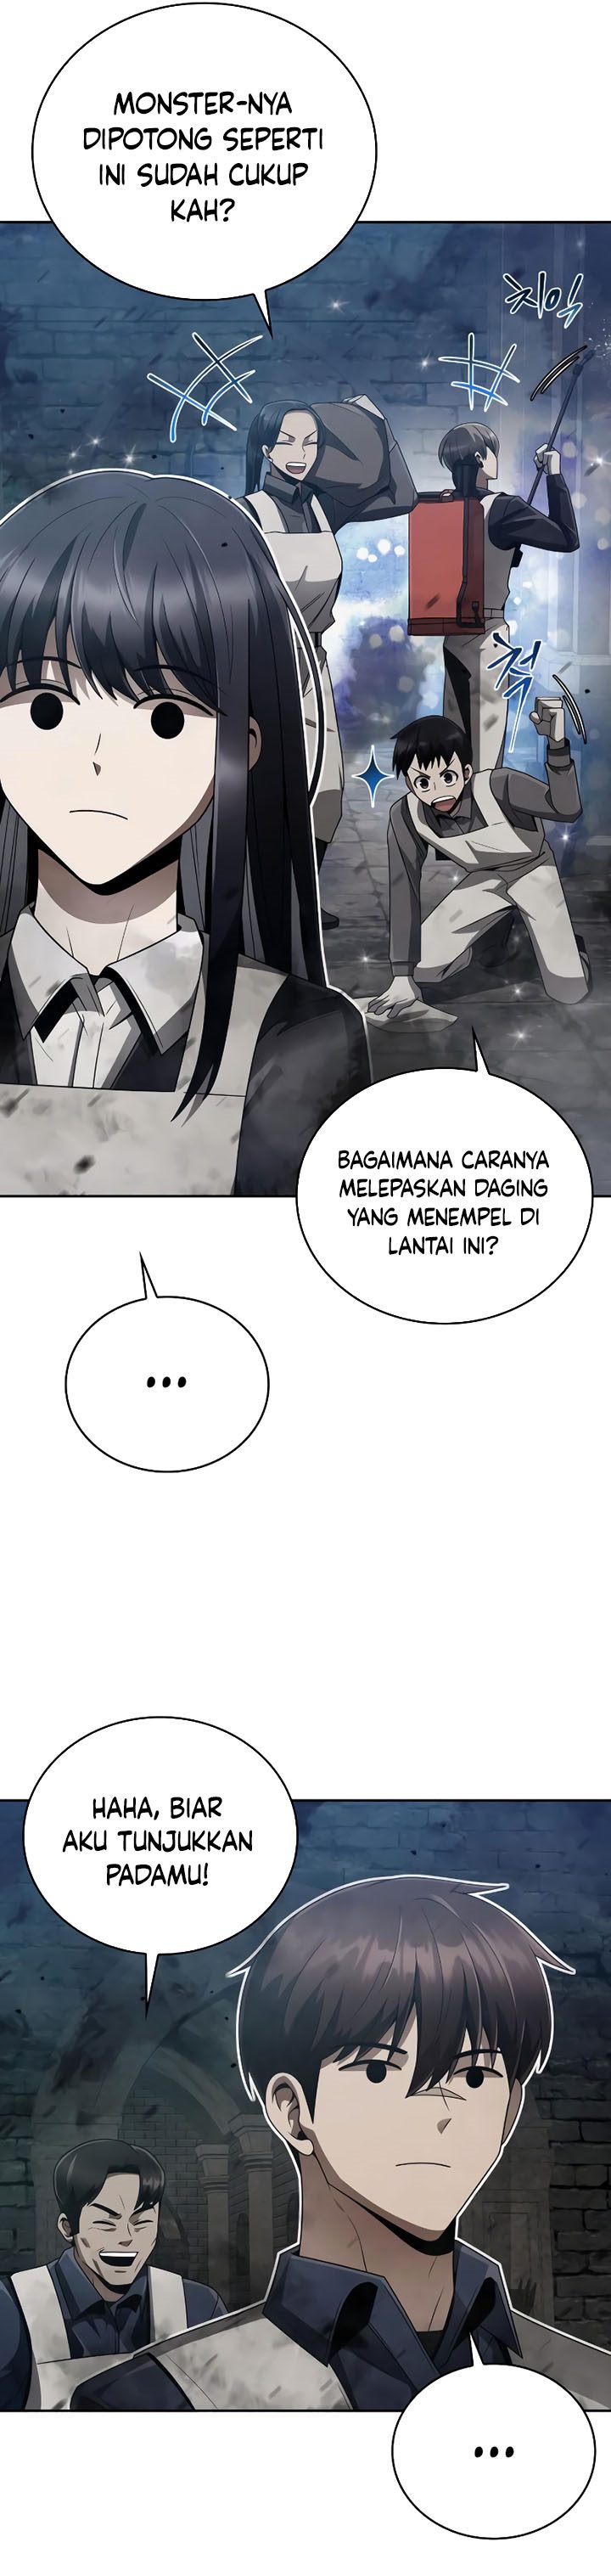 Dilarang COPAS - situs resmi www.mangacanblog.com - Komik clever cleaning life of the returned genius hunter 019 - chapter 19 20 Indonesia clever cleaning life of the returned genius hunter 019 - chapter 19 Terbaru 4|Baca Manga Komik Indonesia|Mangacan